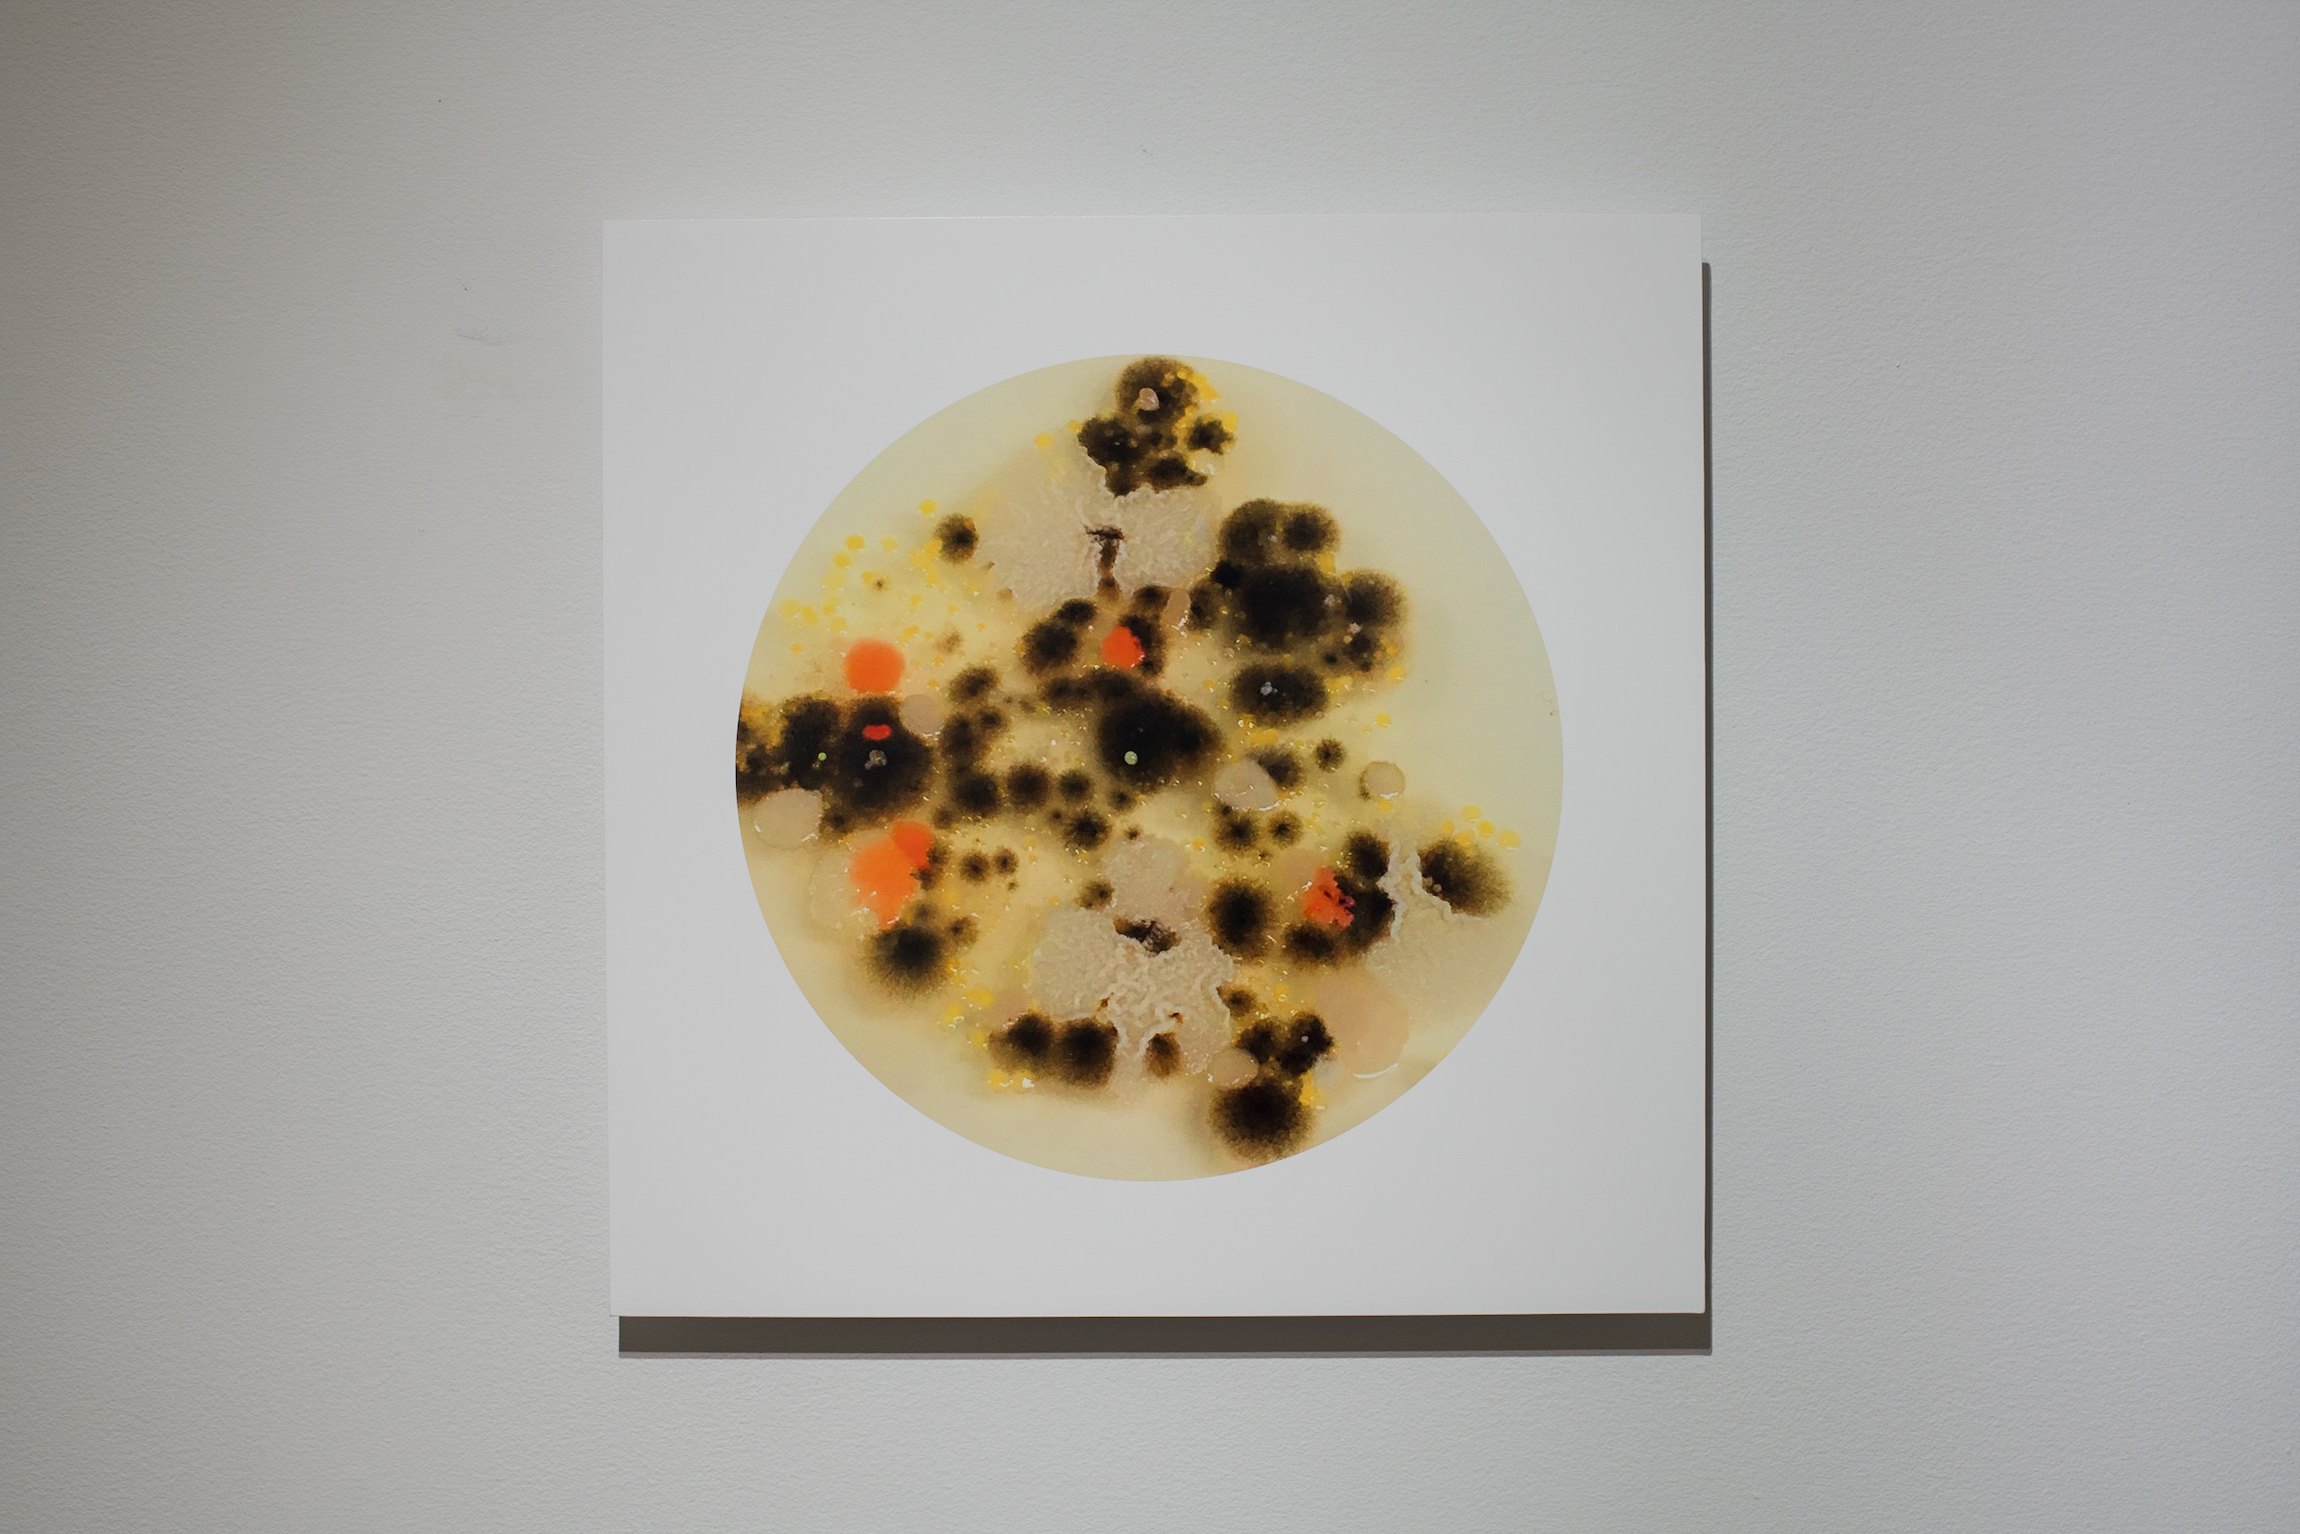 Morphology series artwork of fungal and bacterial colonies from Chloe Darke's Master of Fine Arts exhibition Secrete, Augment, Testify at the Chazen Museum of Art, University of Wisconsin-Madison. Photography by Kyle Herrera.